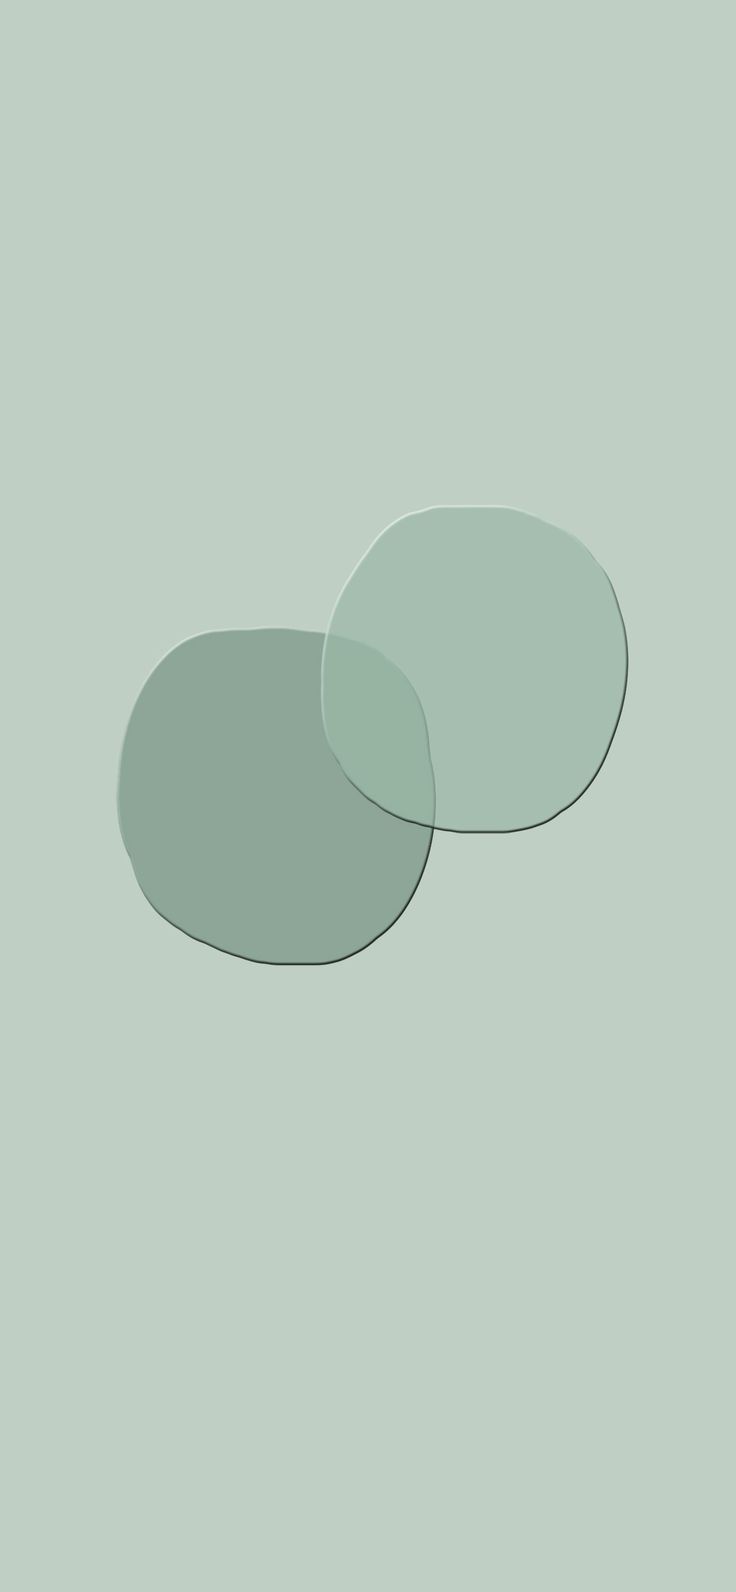 A green and white image of two circles - Sage green